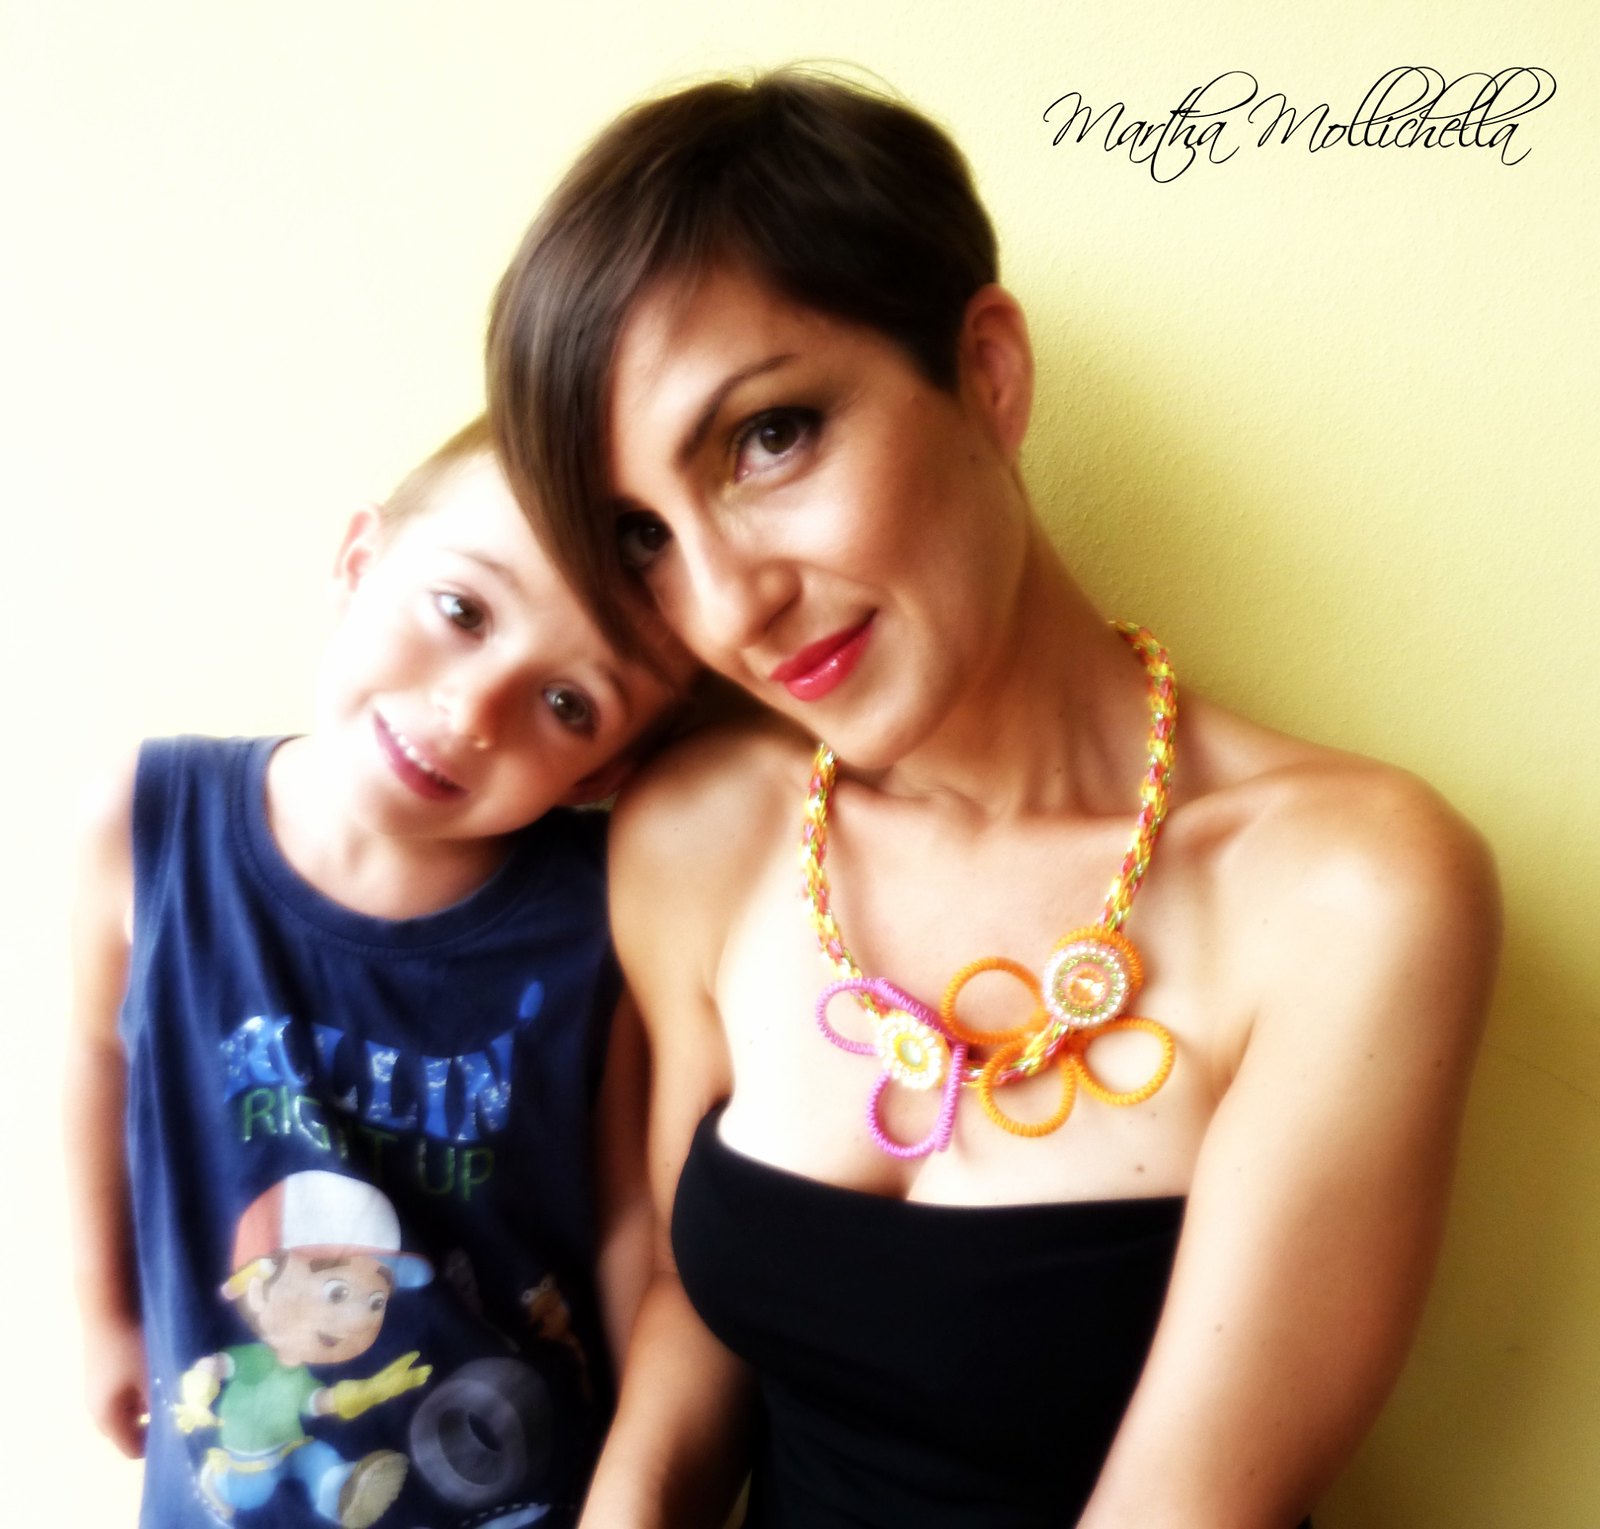 Martha Mollichella Handmade Jewelry family about face to face